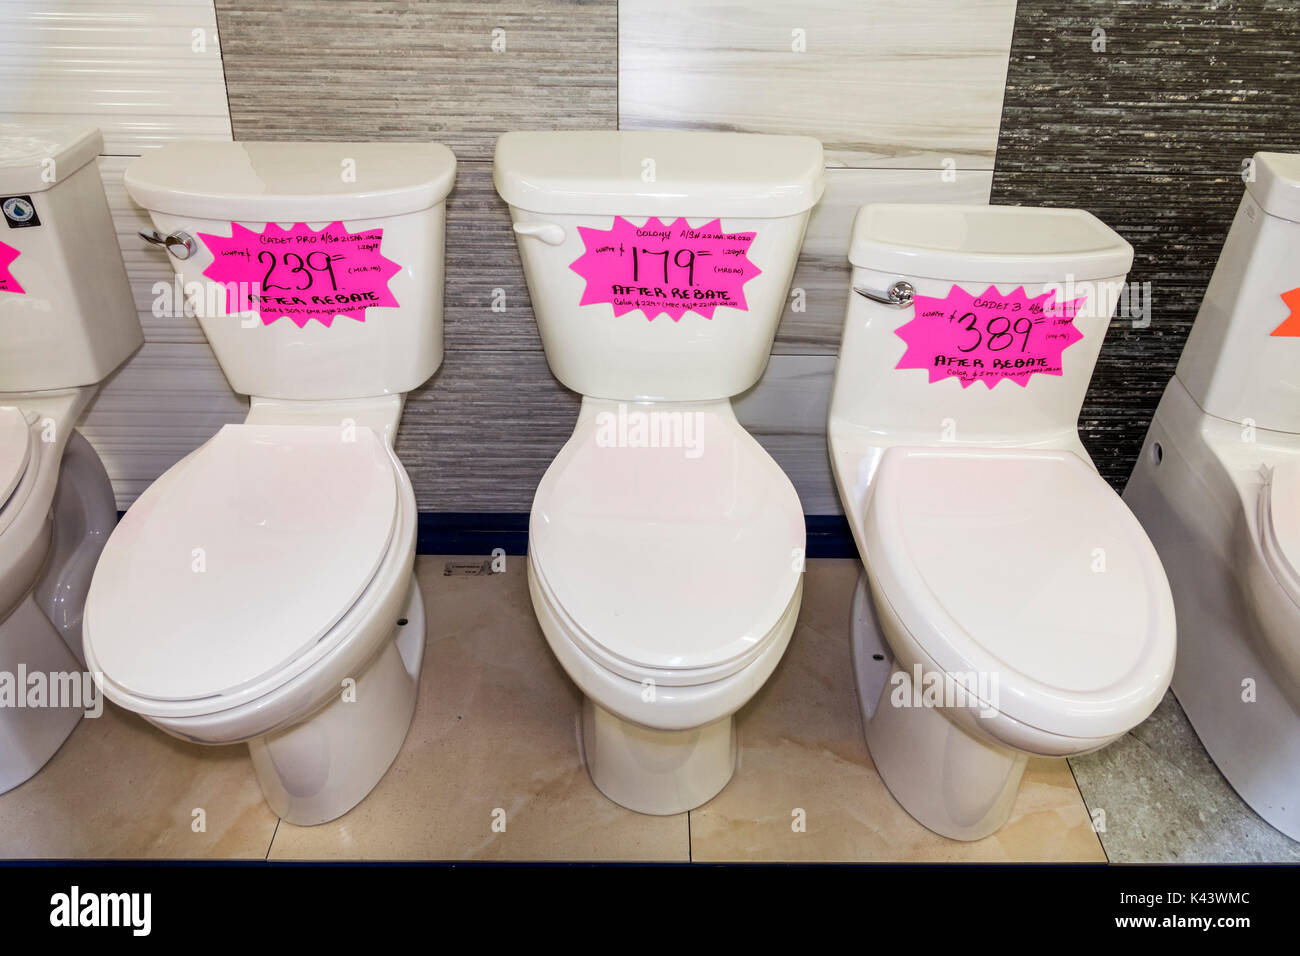 Miami Florida,new toilets,sale,display sale product,loos,commodes,prices,after rebate,visitors travel traveling tour tourist tourism landmark Stock Photo - Alamy